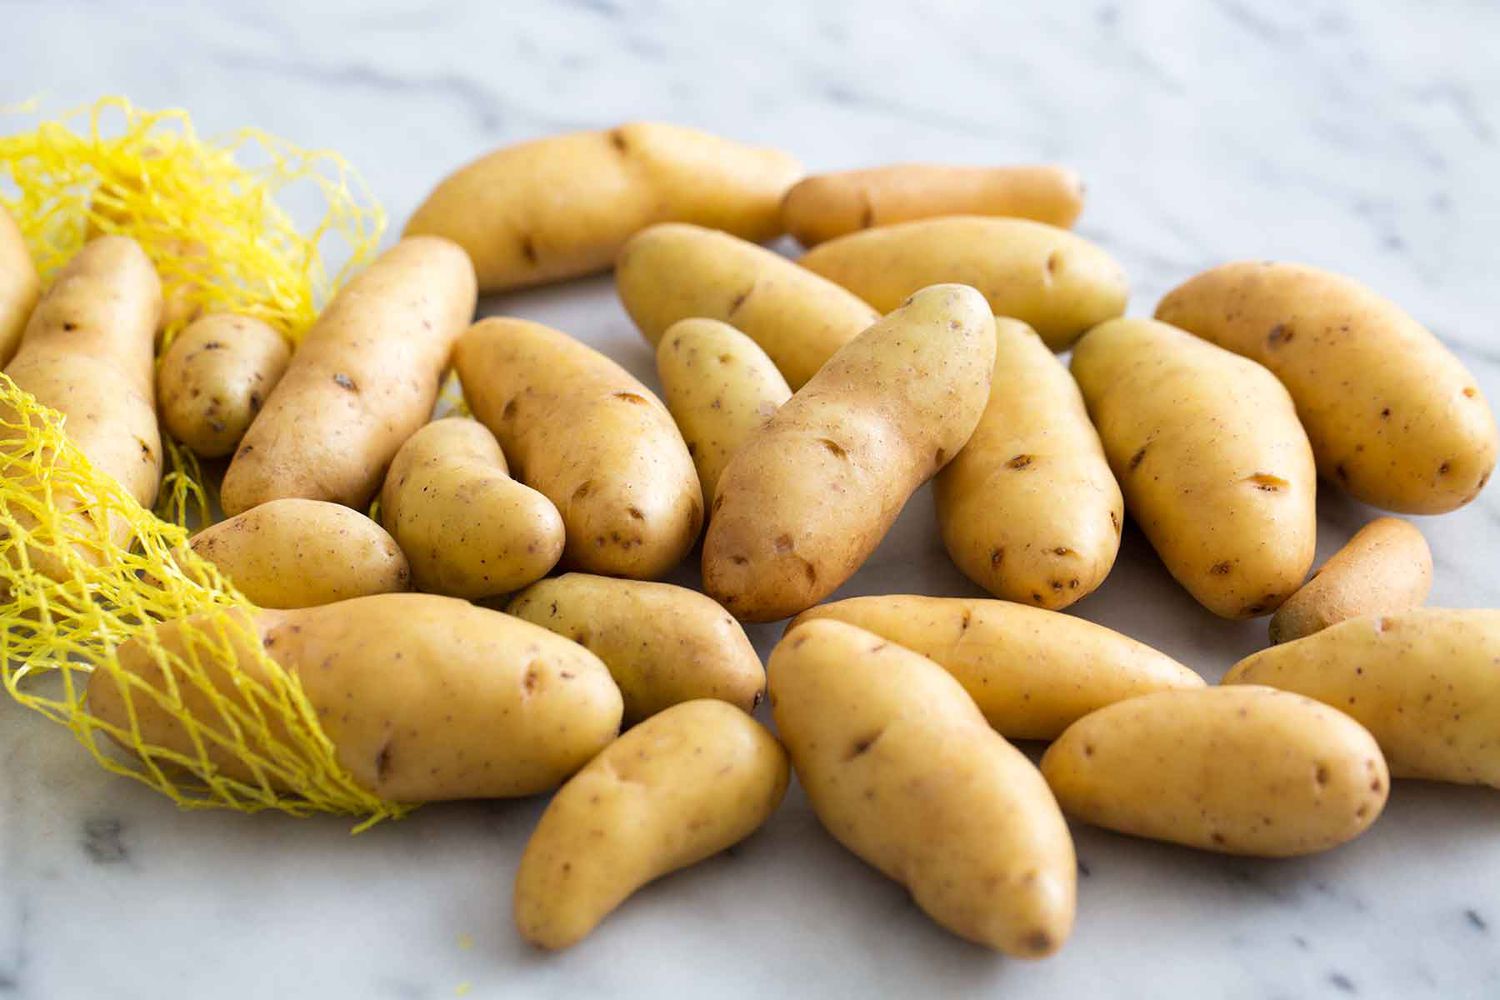 How To Store Fingerling Potatoes